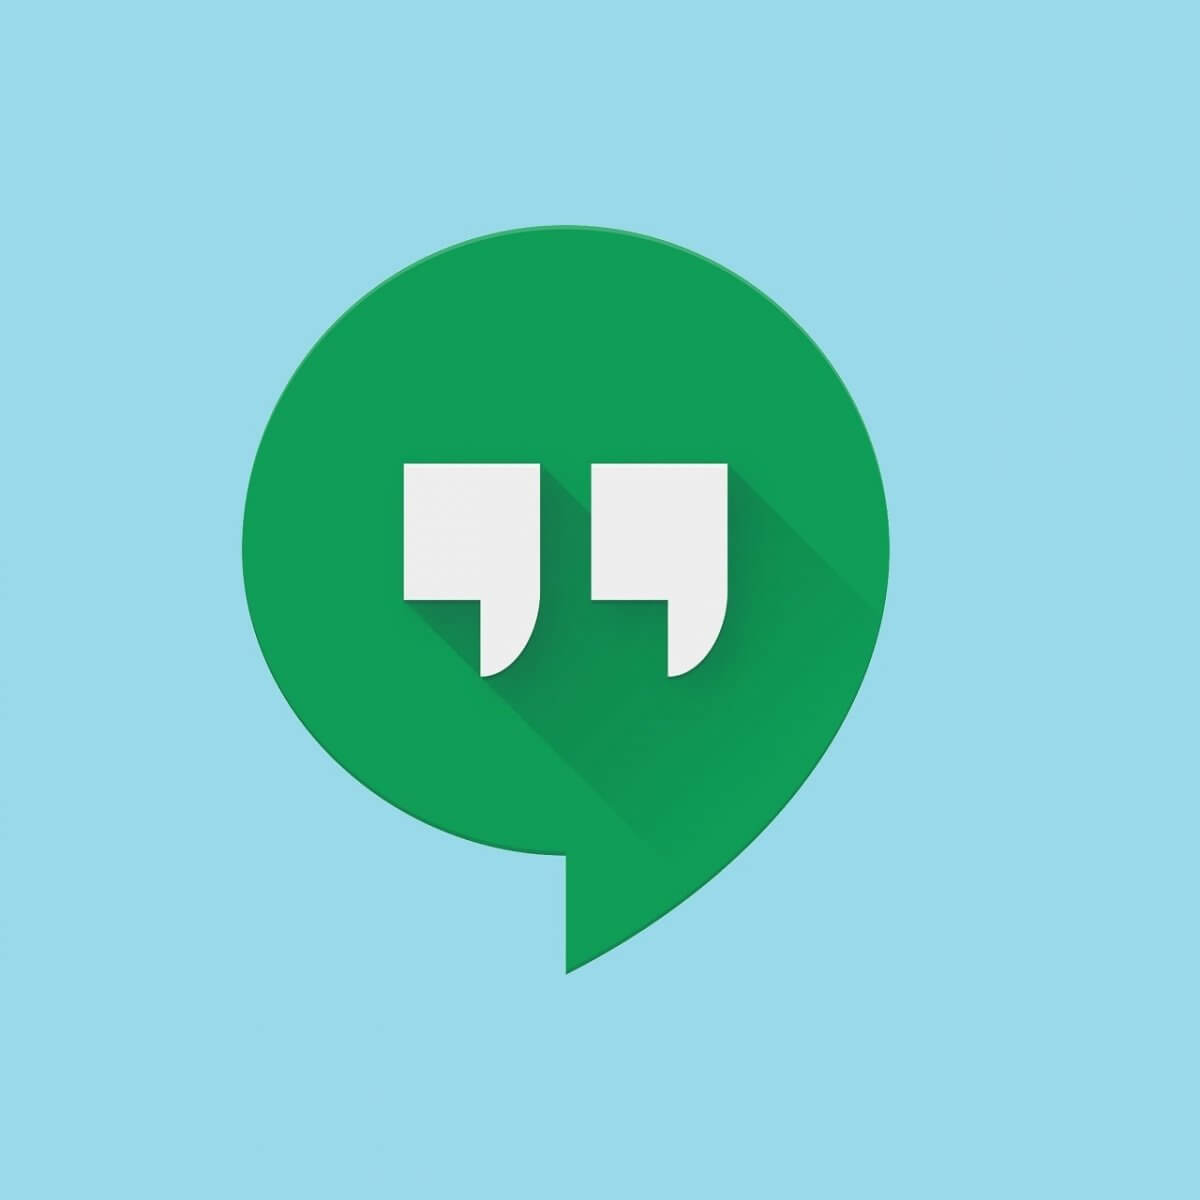 Hangouts message not sent touch to retry